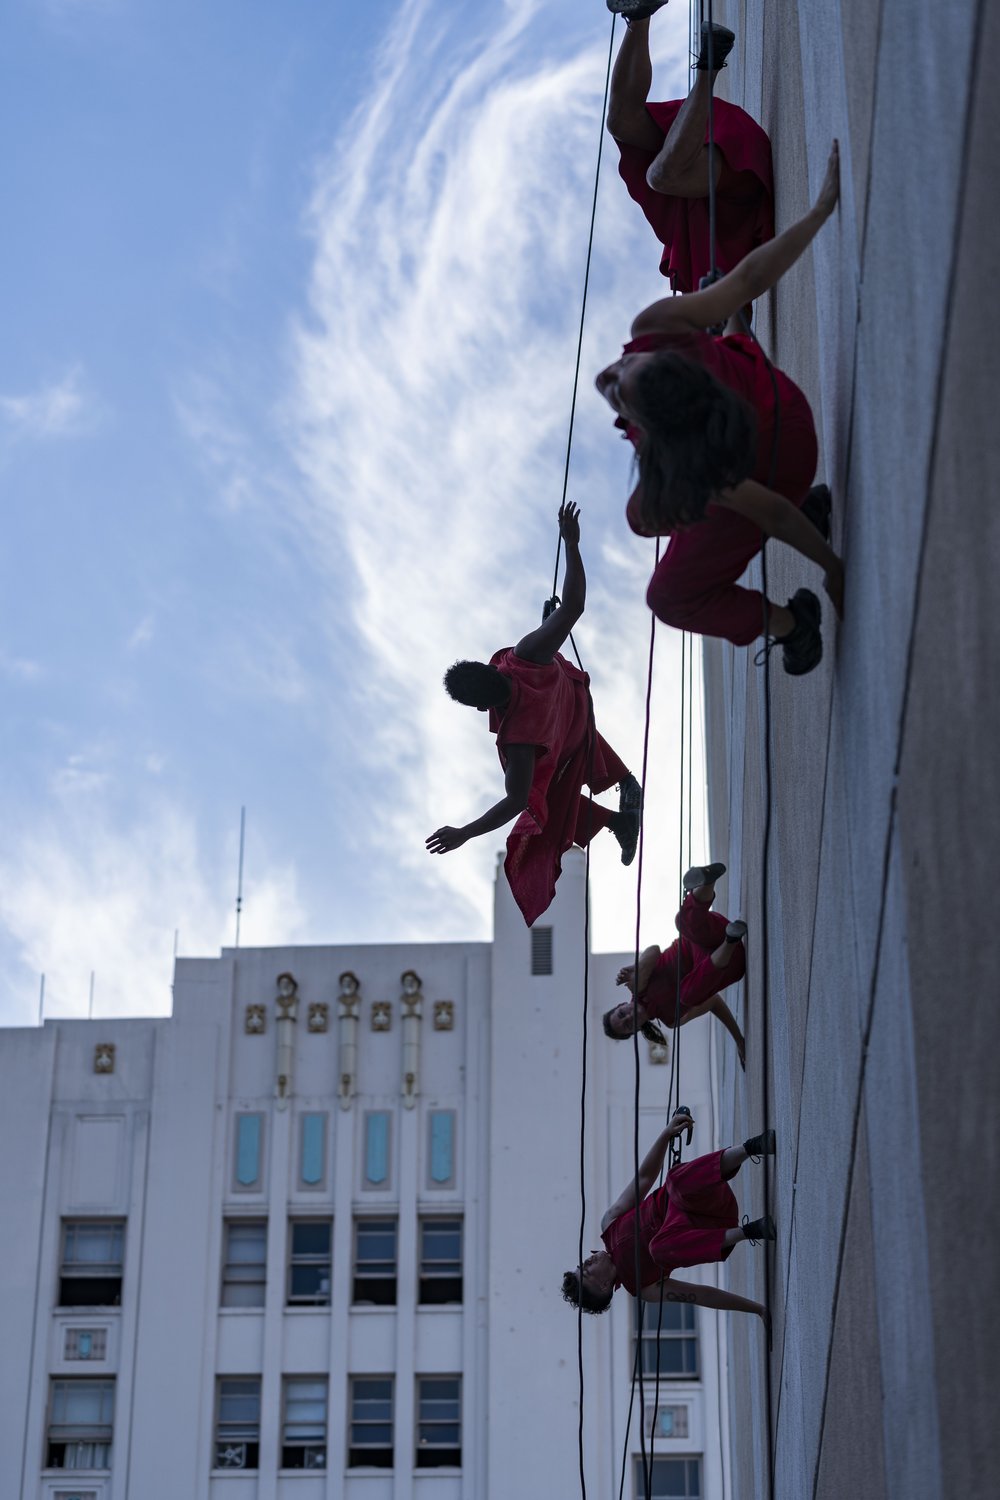  A vertical dance piece set to original live music, that weaves choreography and climbing technology with the art of textiles and ecological stewardship. Experience the museum facade transformed into a giant loom where stories, aerial movement, and a